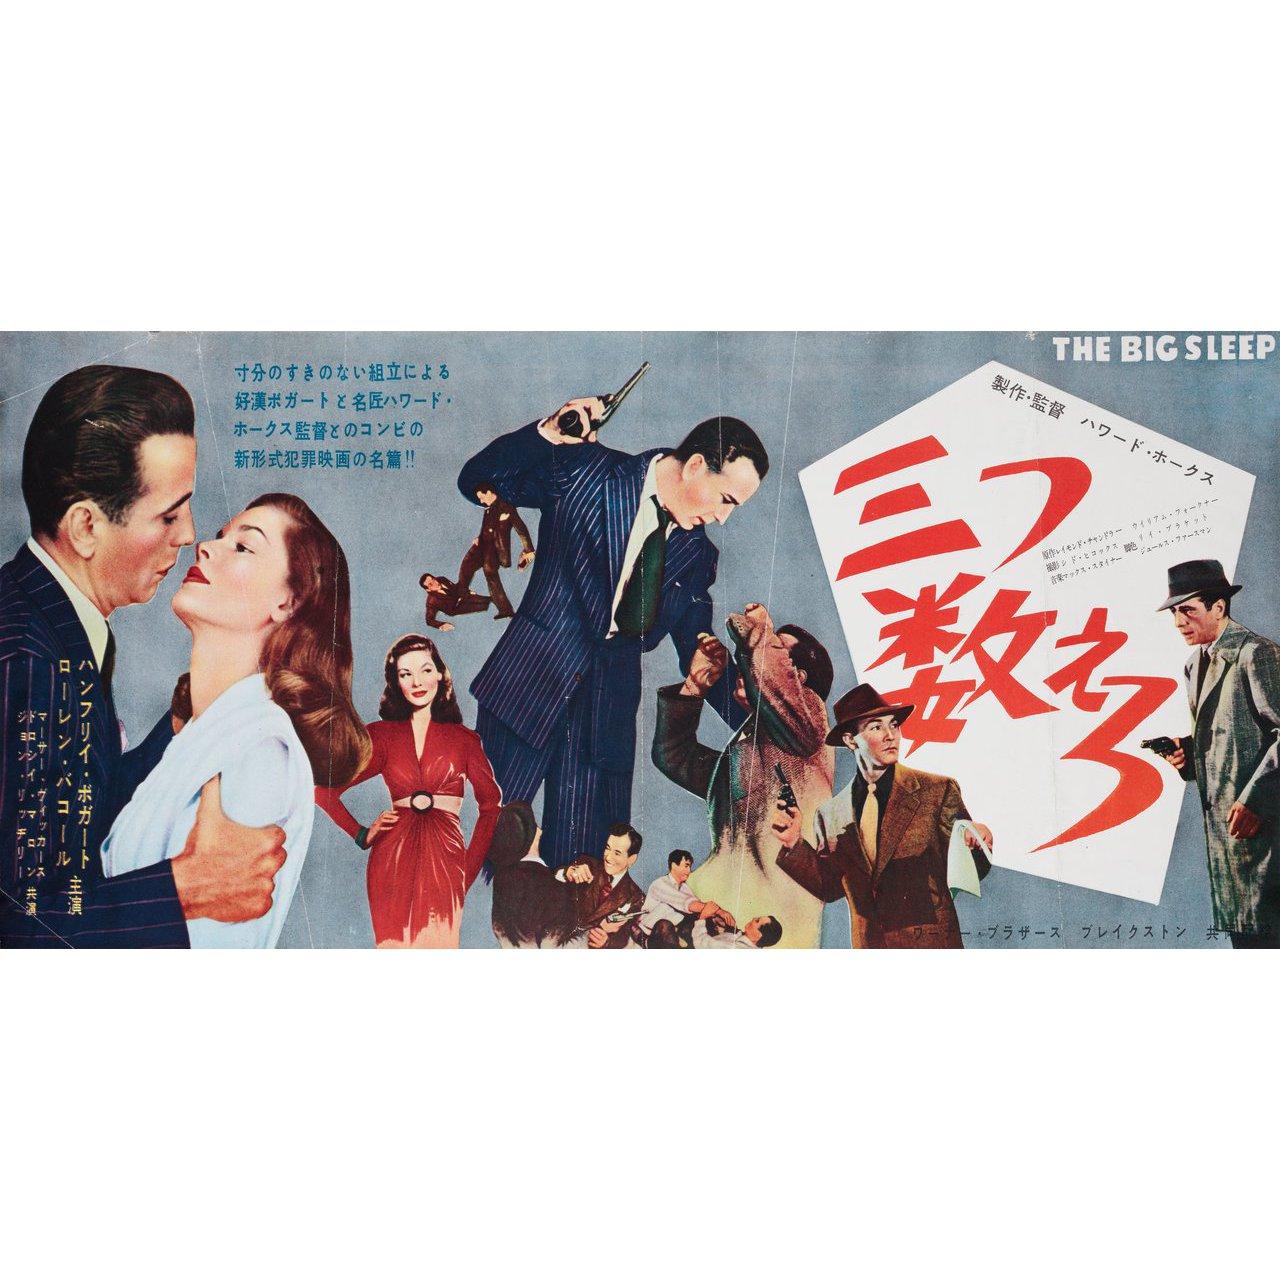 Paper The Big Sleep 1955 Japanese Press Film Poster For Sale